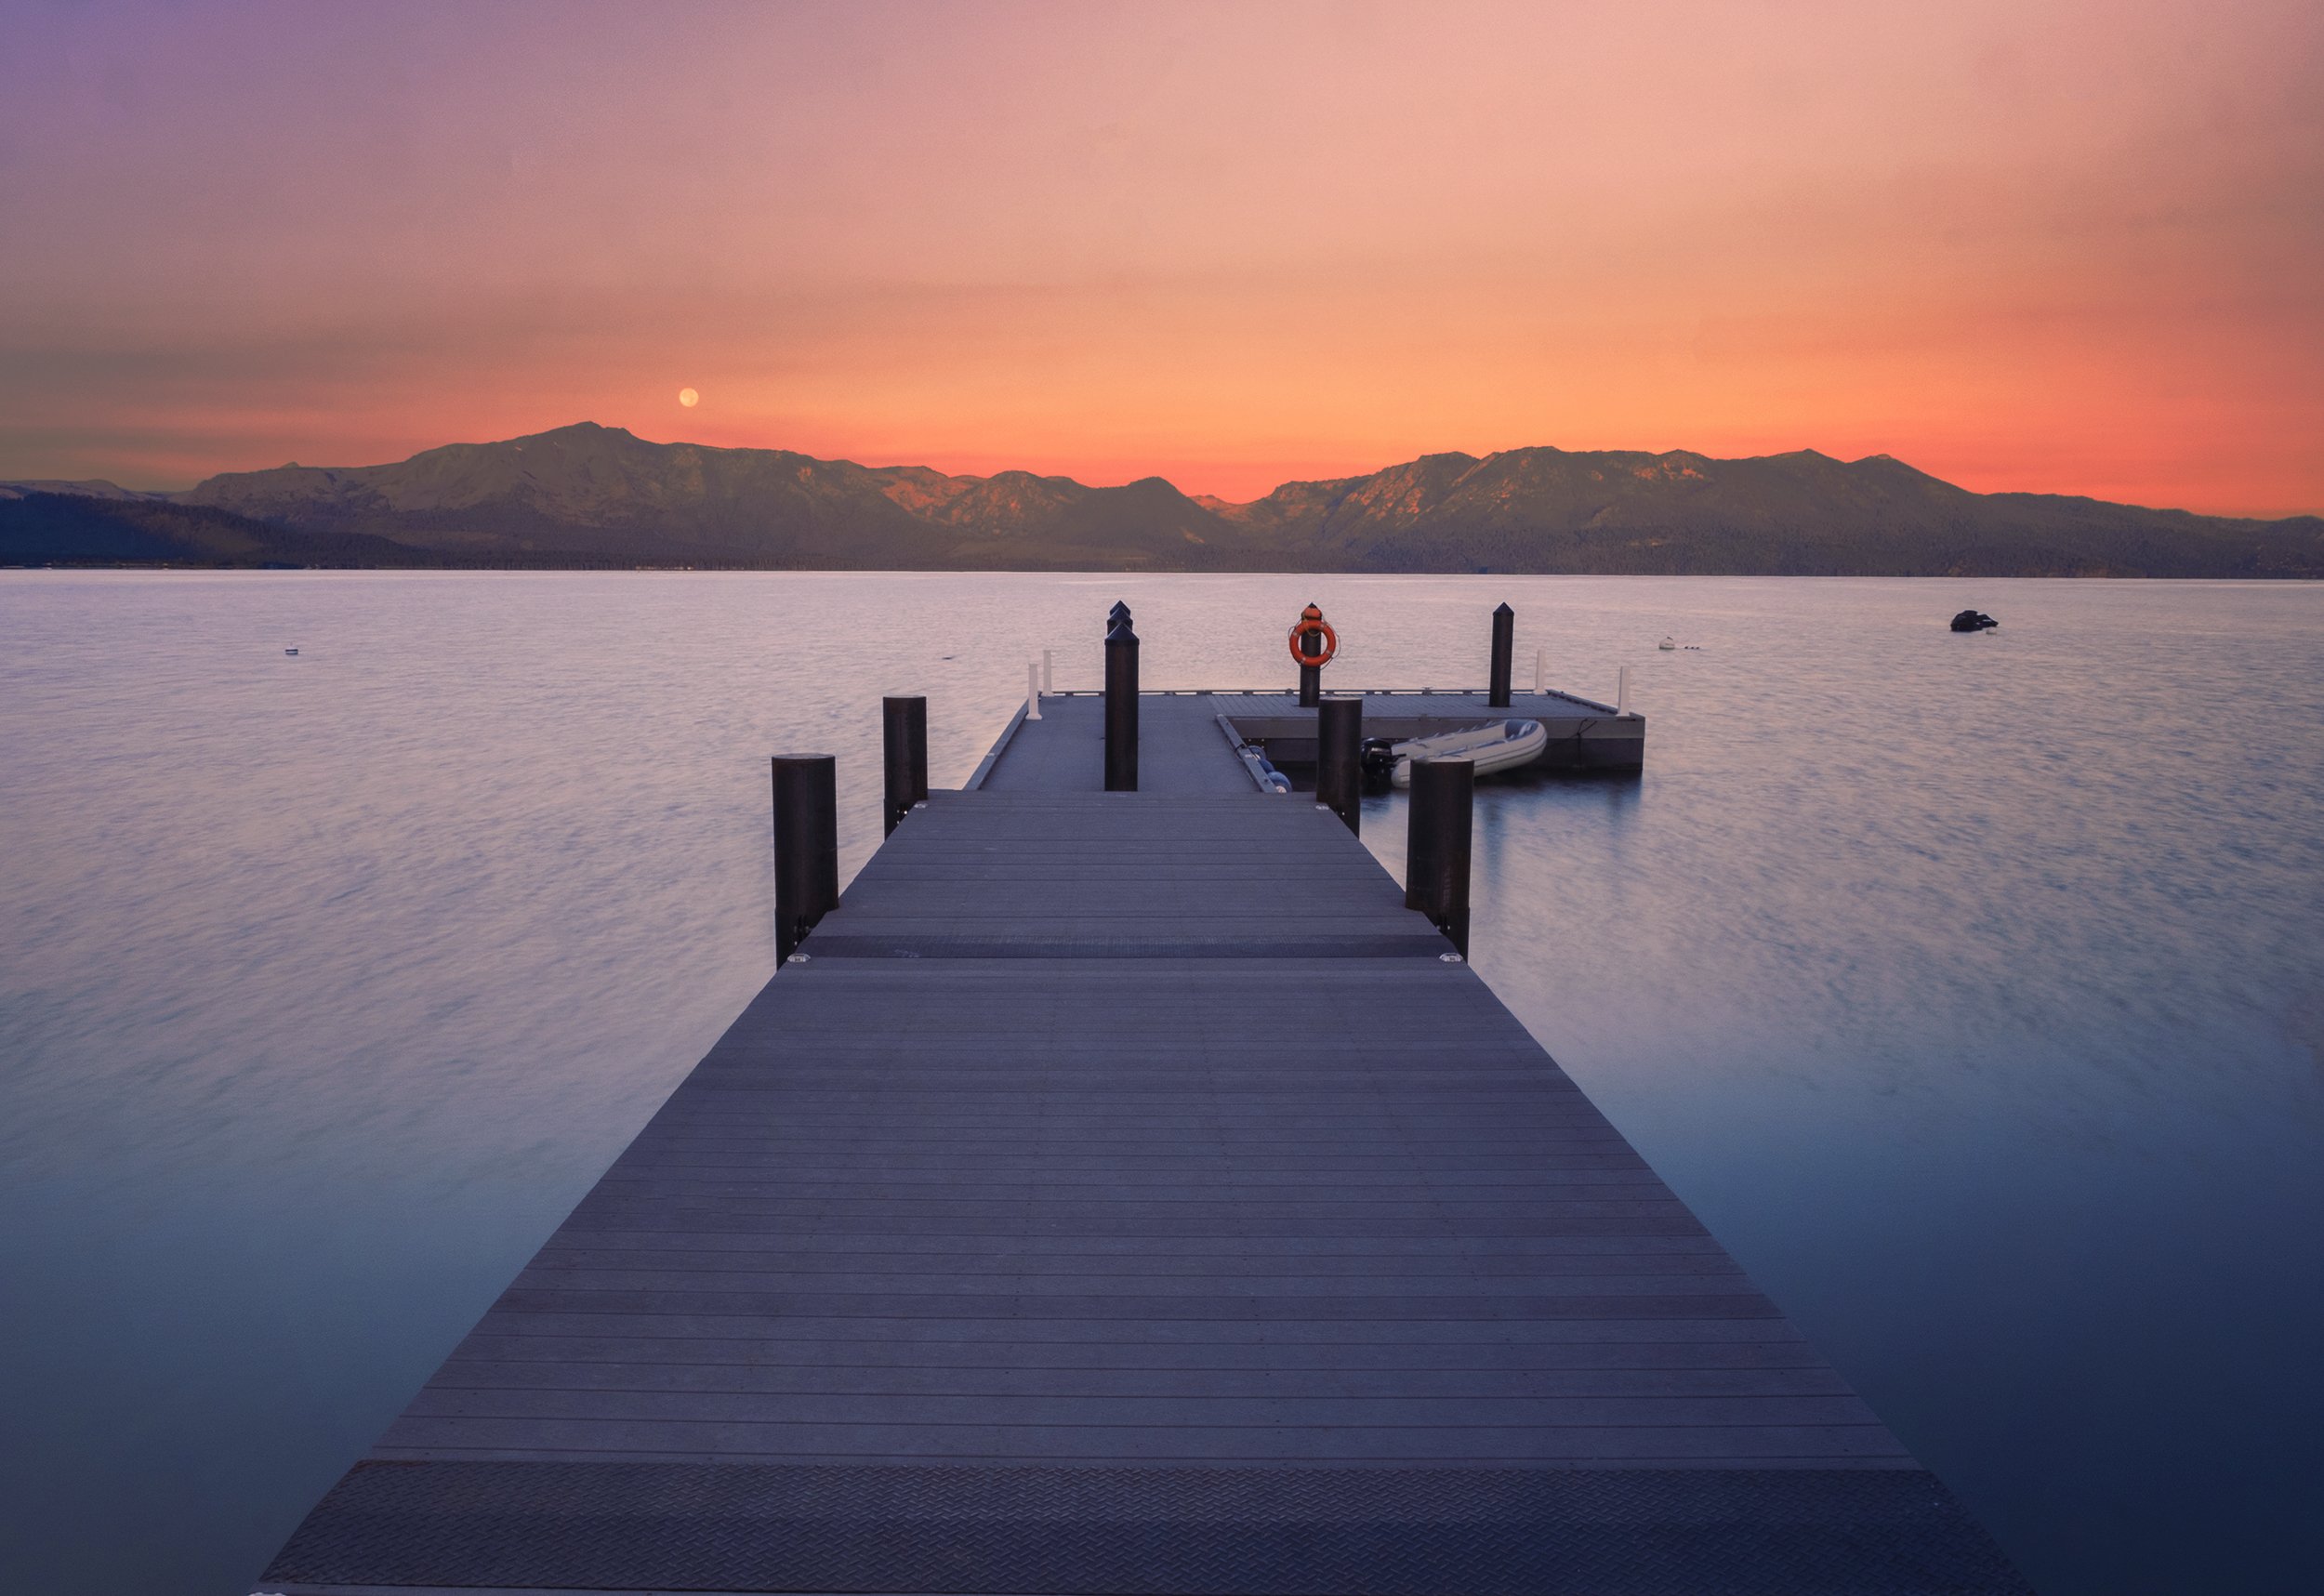 Sunset over Tahoe Beach Club's private dock, surrounded by the warm hues of the sky, offering a peaceful and scenic view of the tranquil waters of Lake Tahoe.